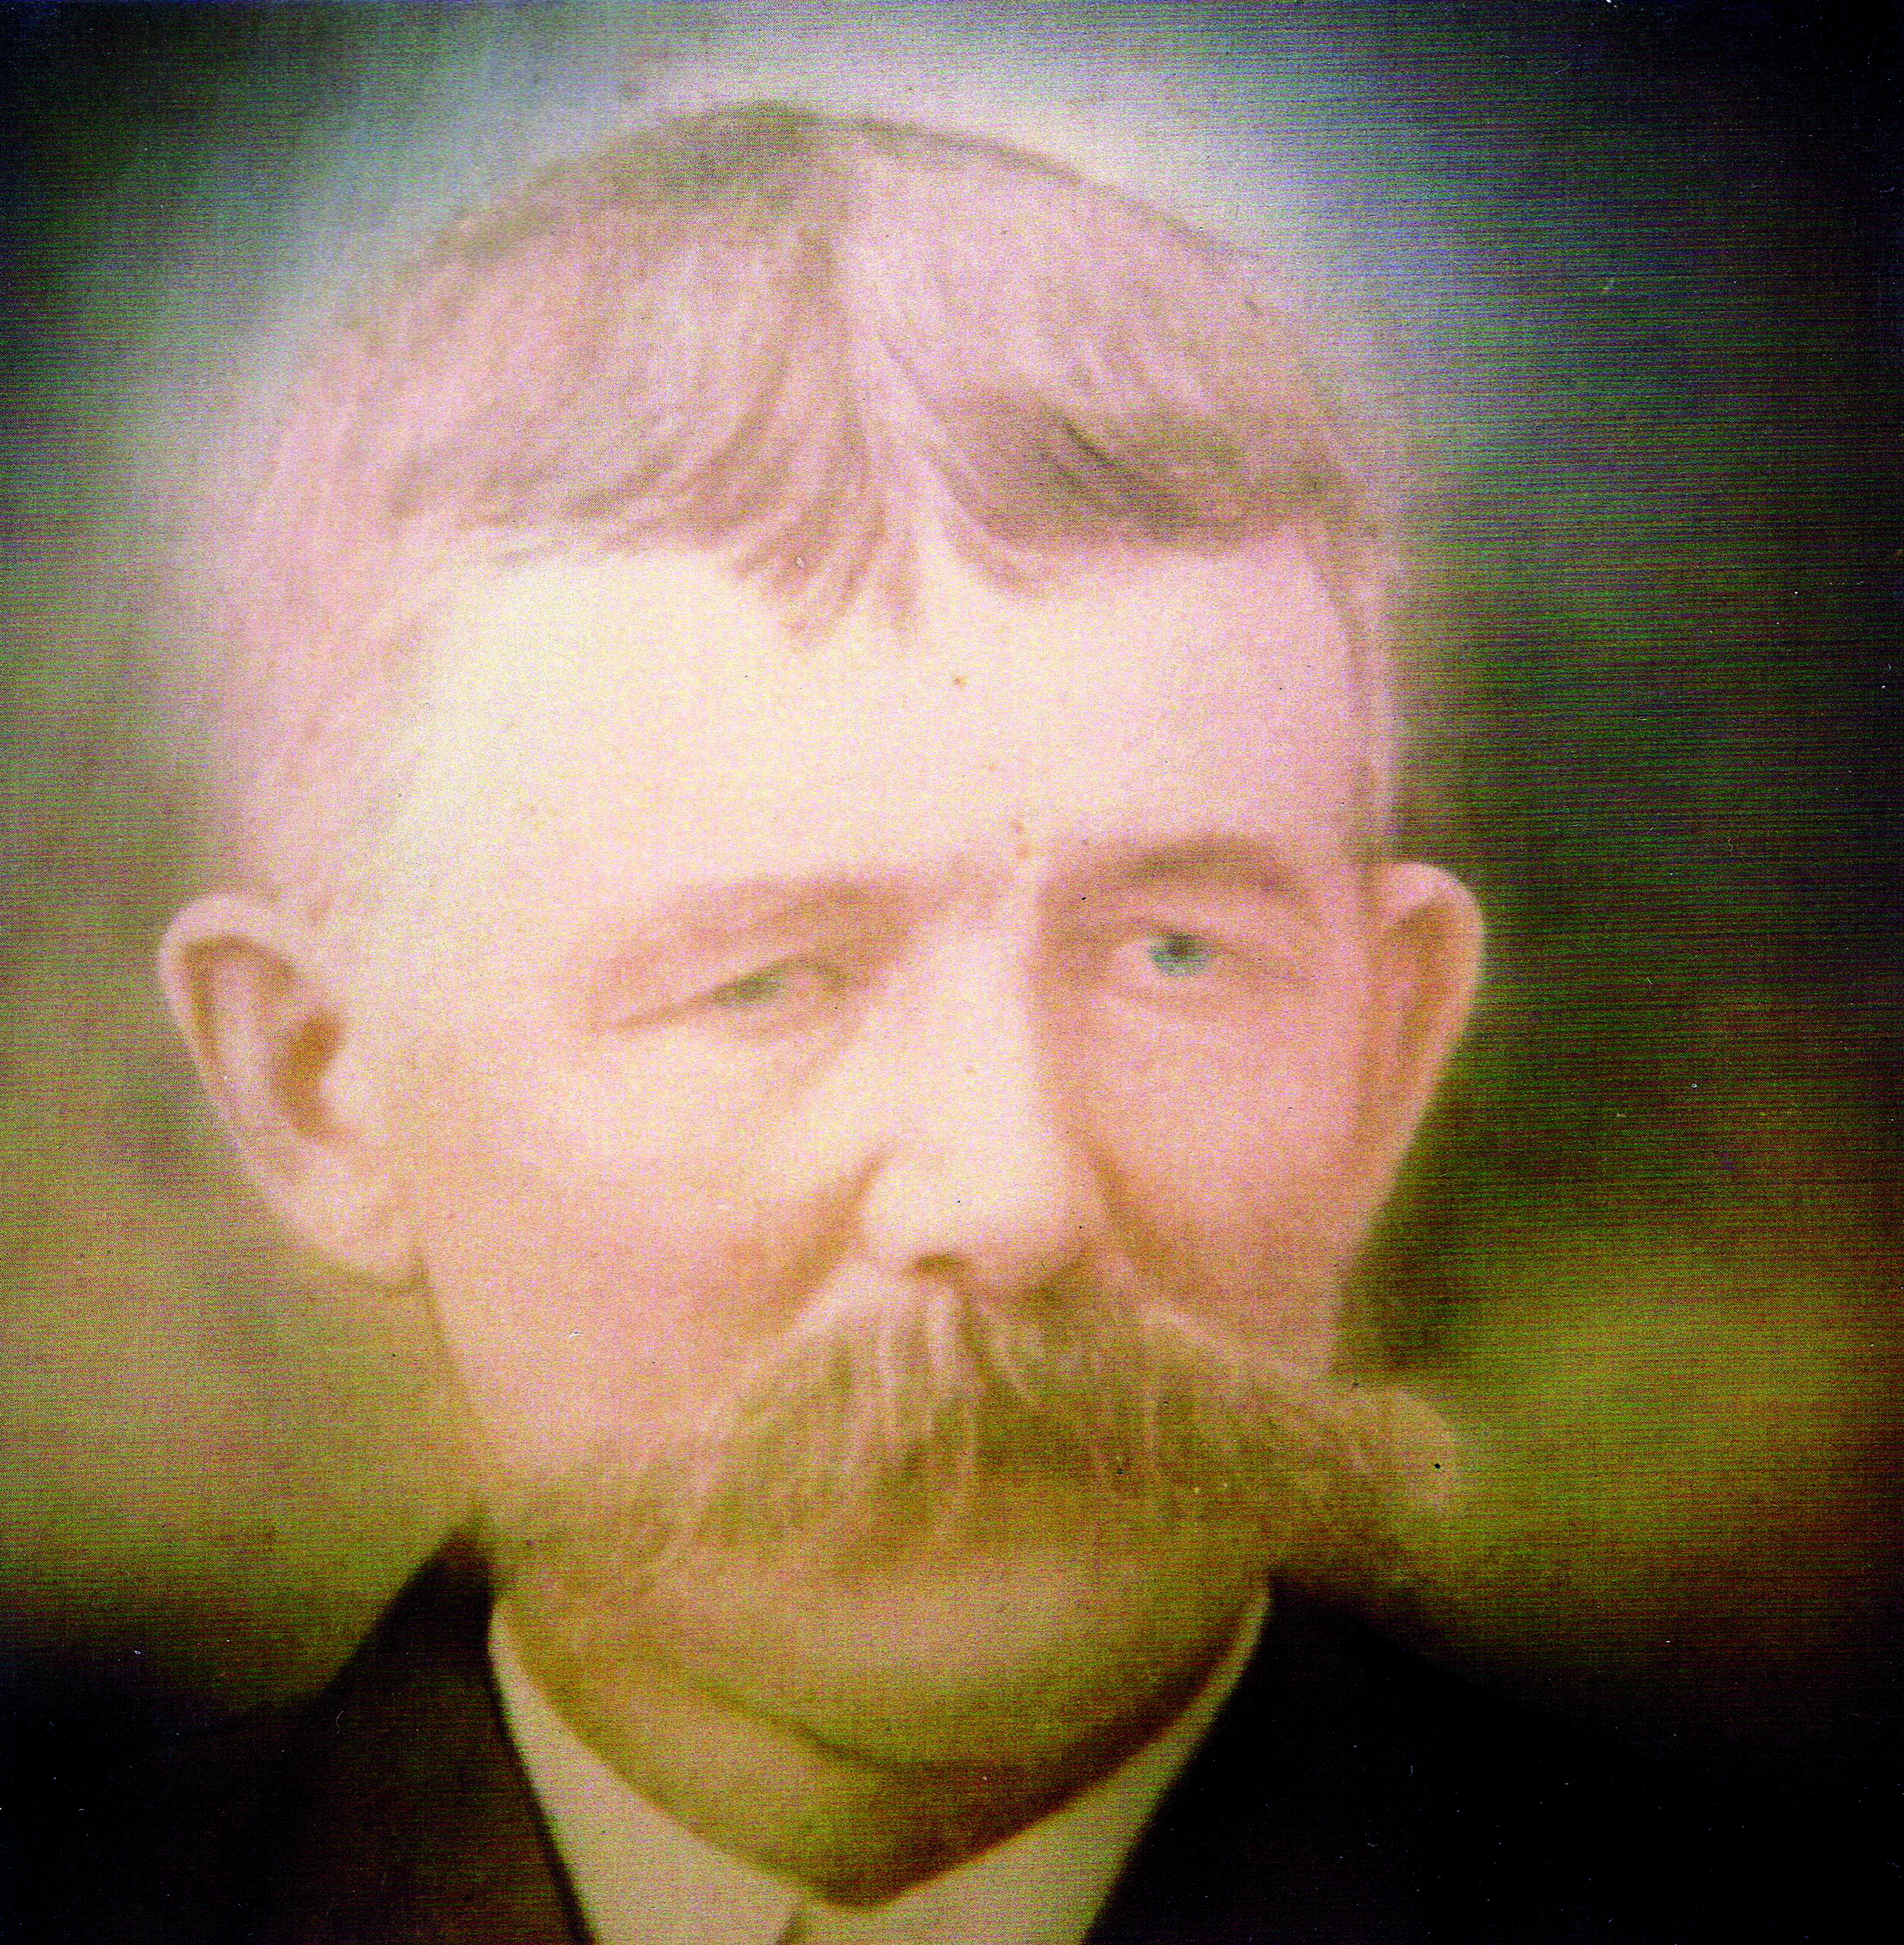 Robert Lee Smith died of the influenza outbreak of 1918.